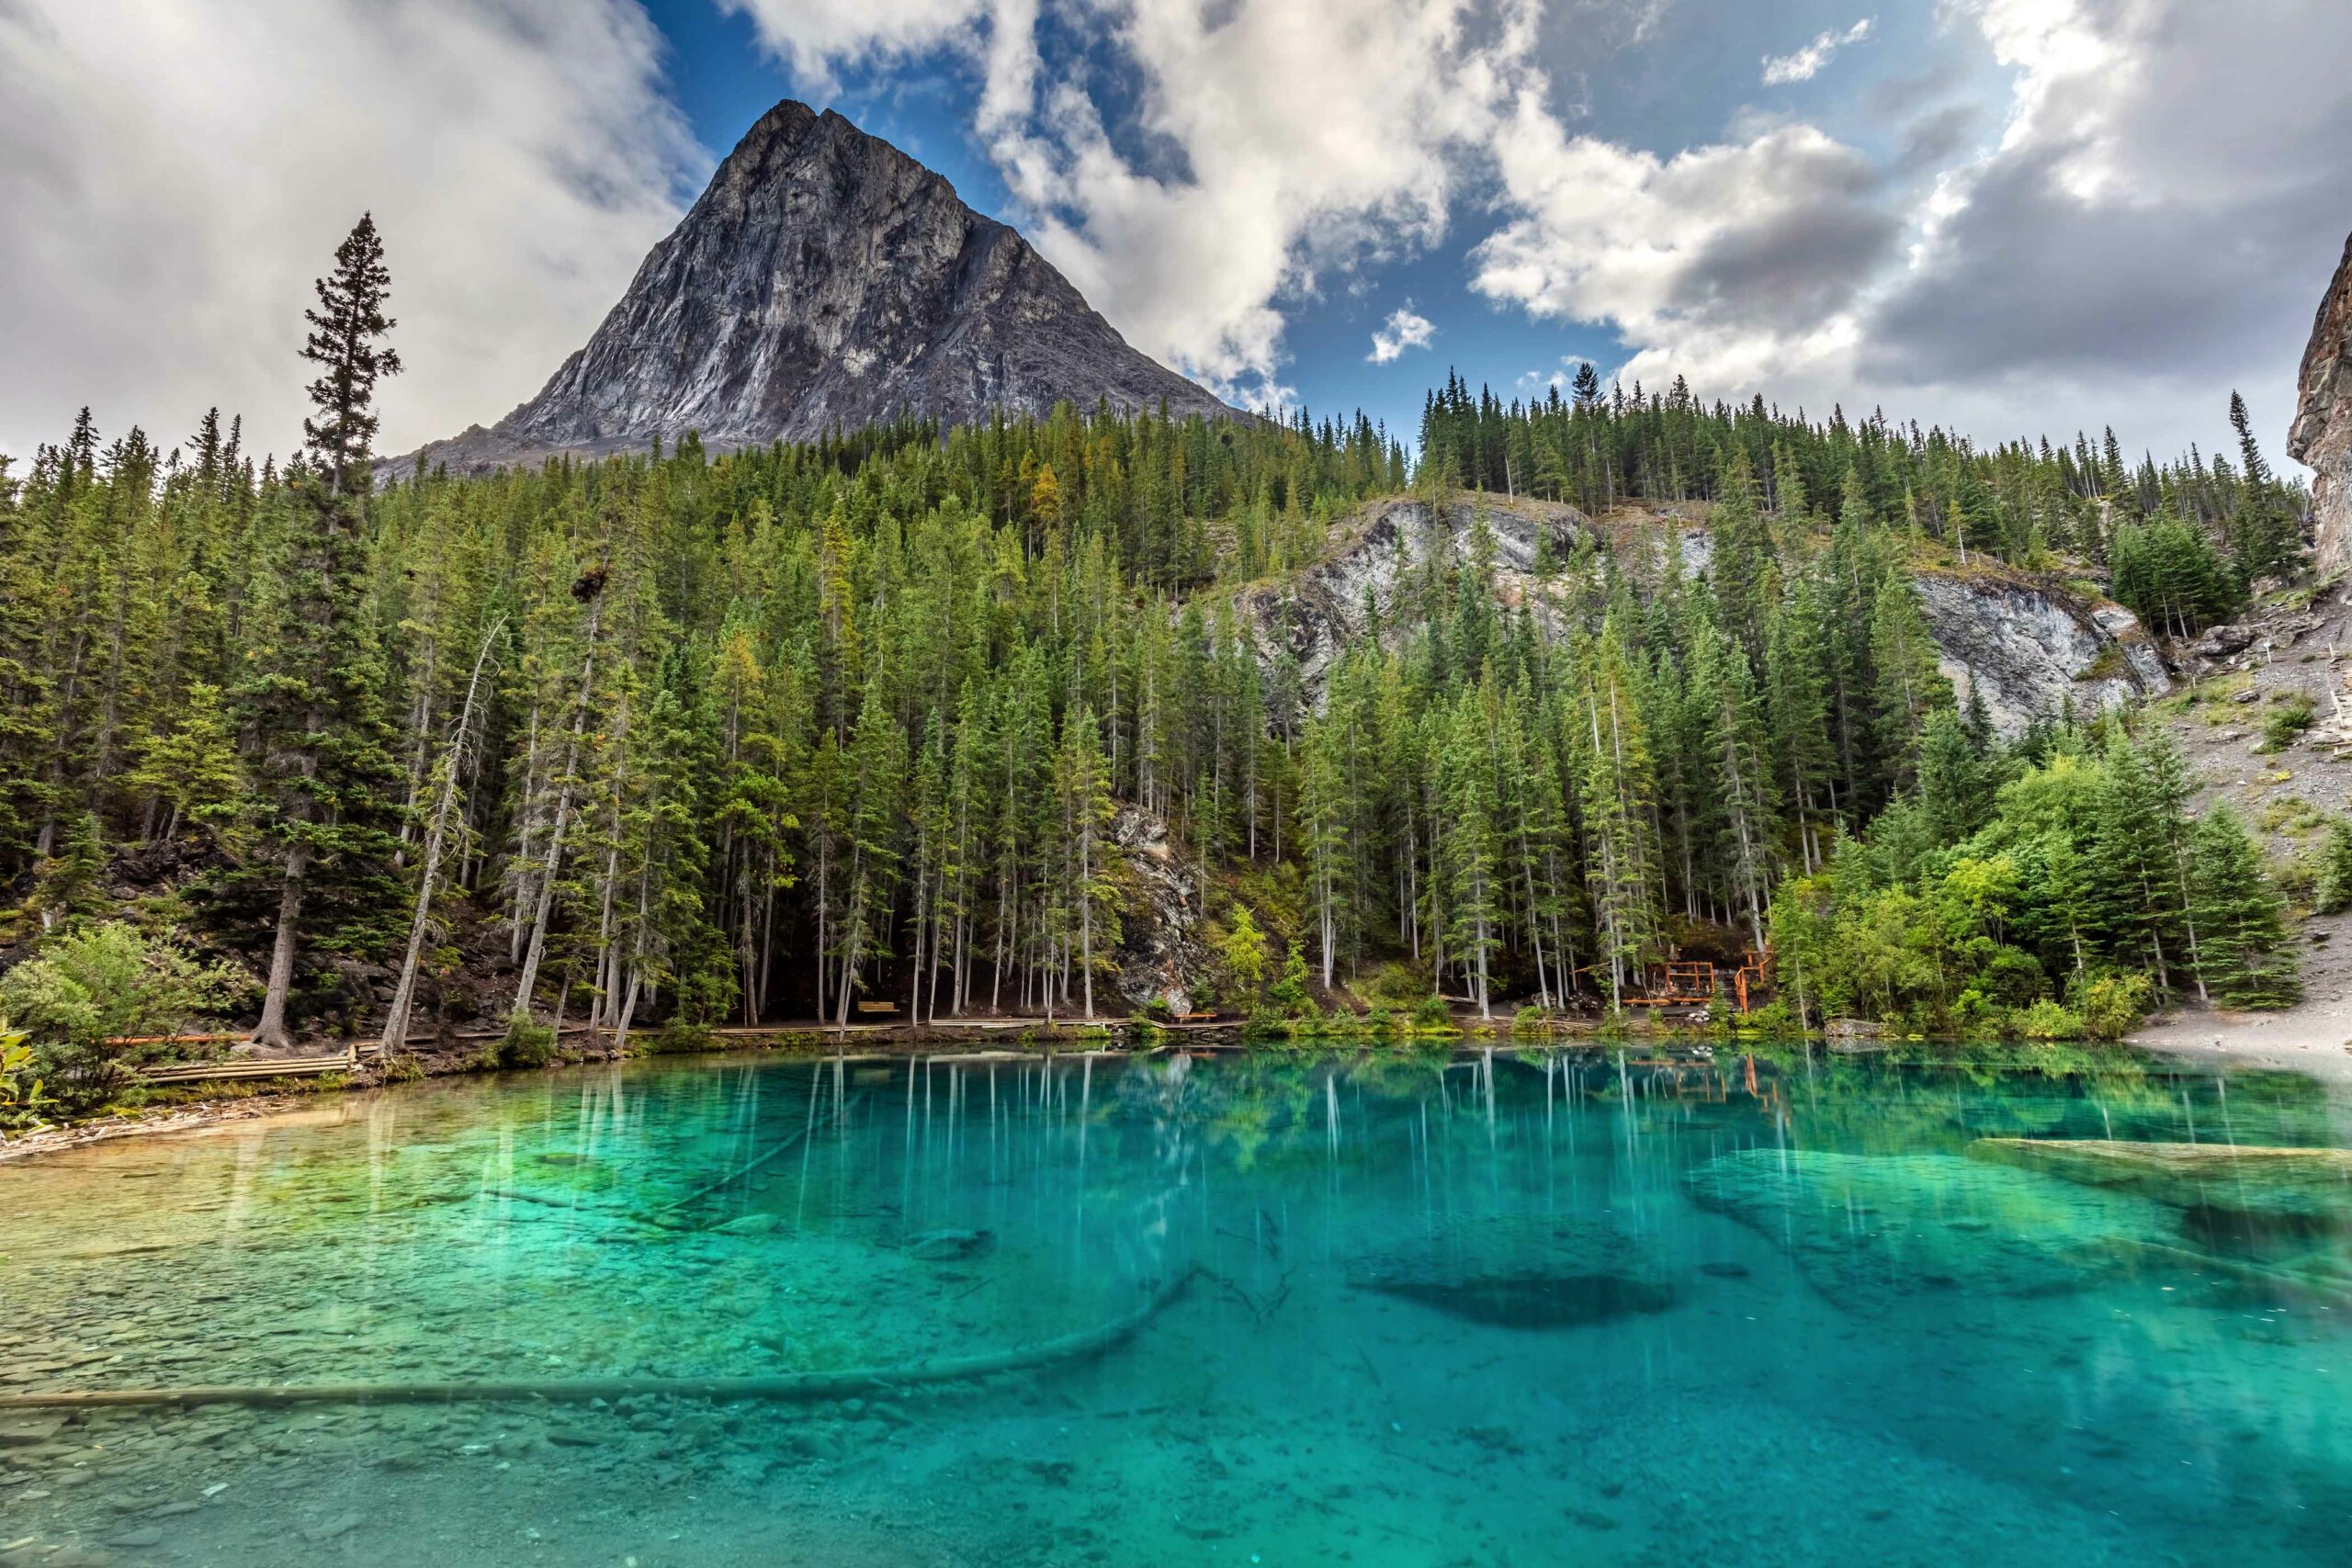 The beautiful, emerald-coloured Grassi Lakes in front of a mountain backdrop. This is a great, easy Kananaskis hike.